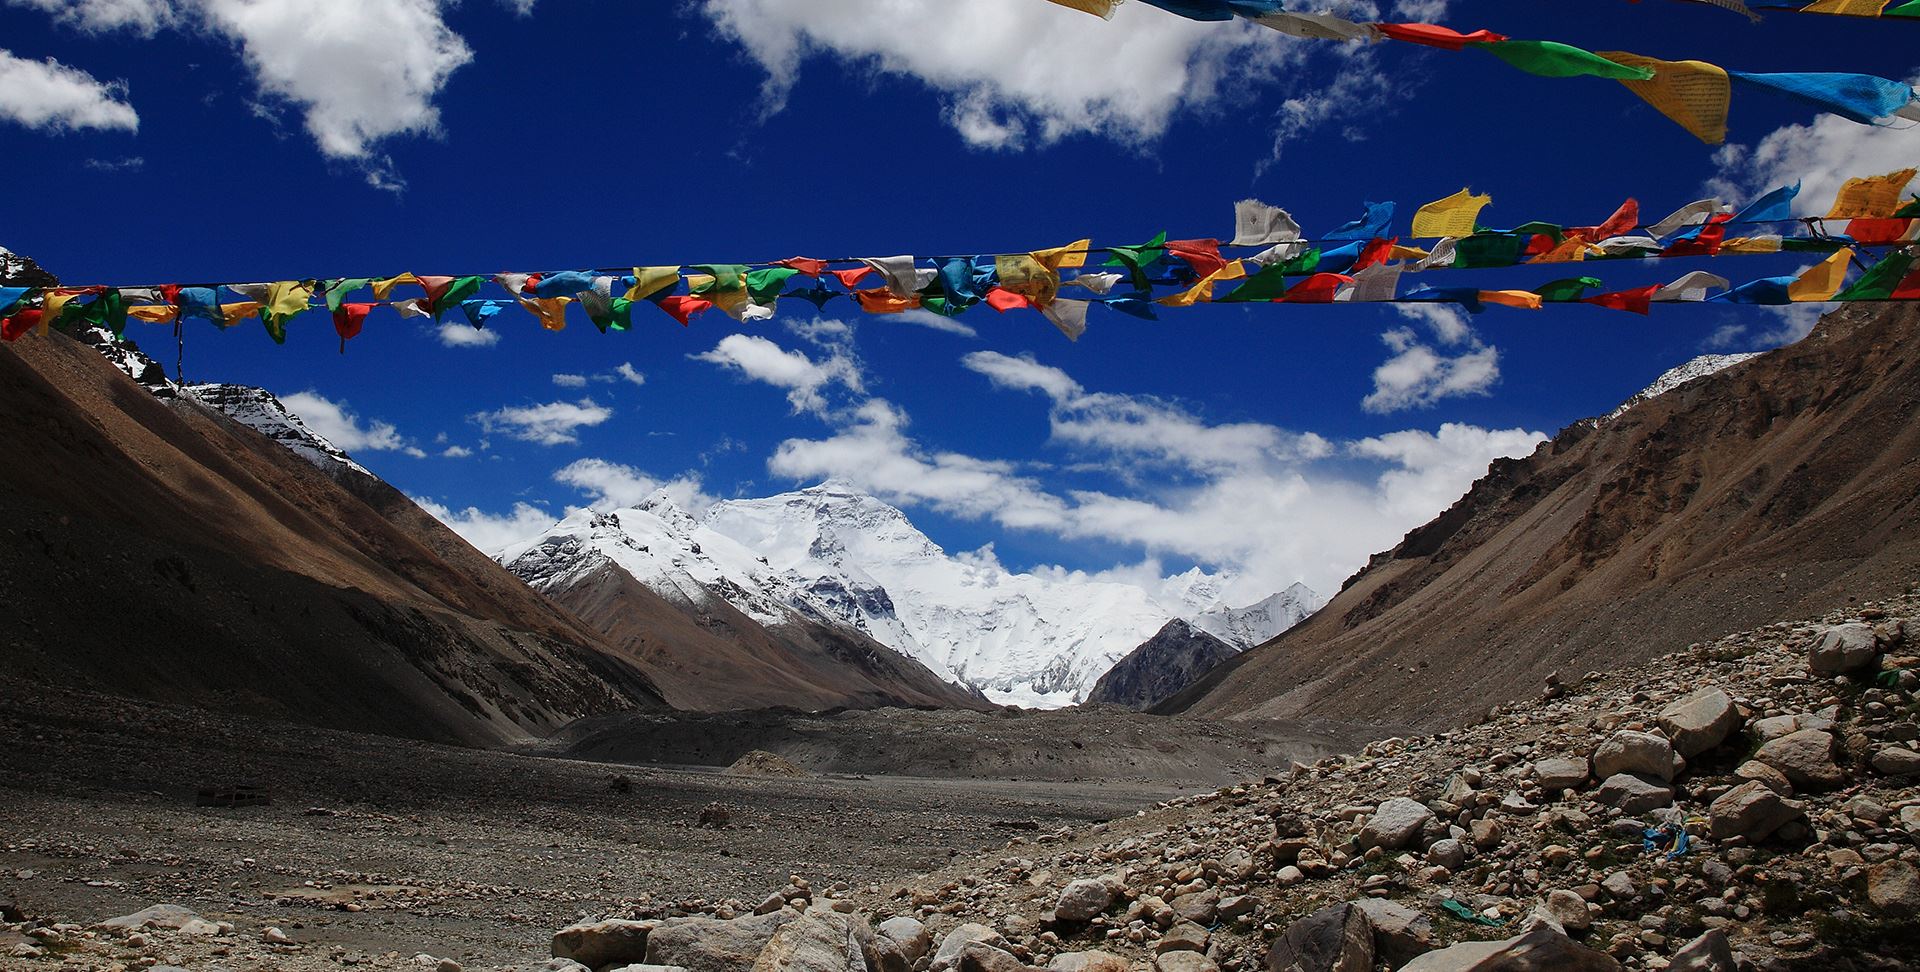 Overland Tour from Sichuan via Tibet to Nepal with Everest BC